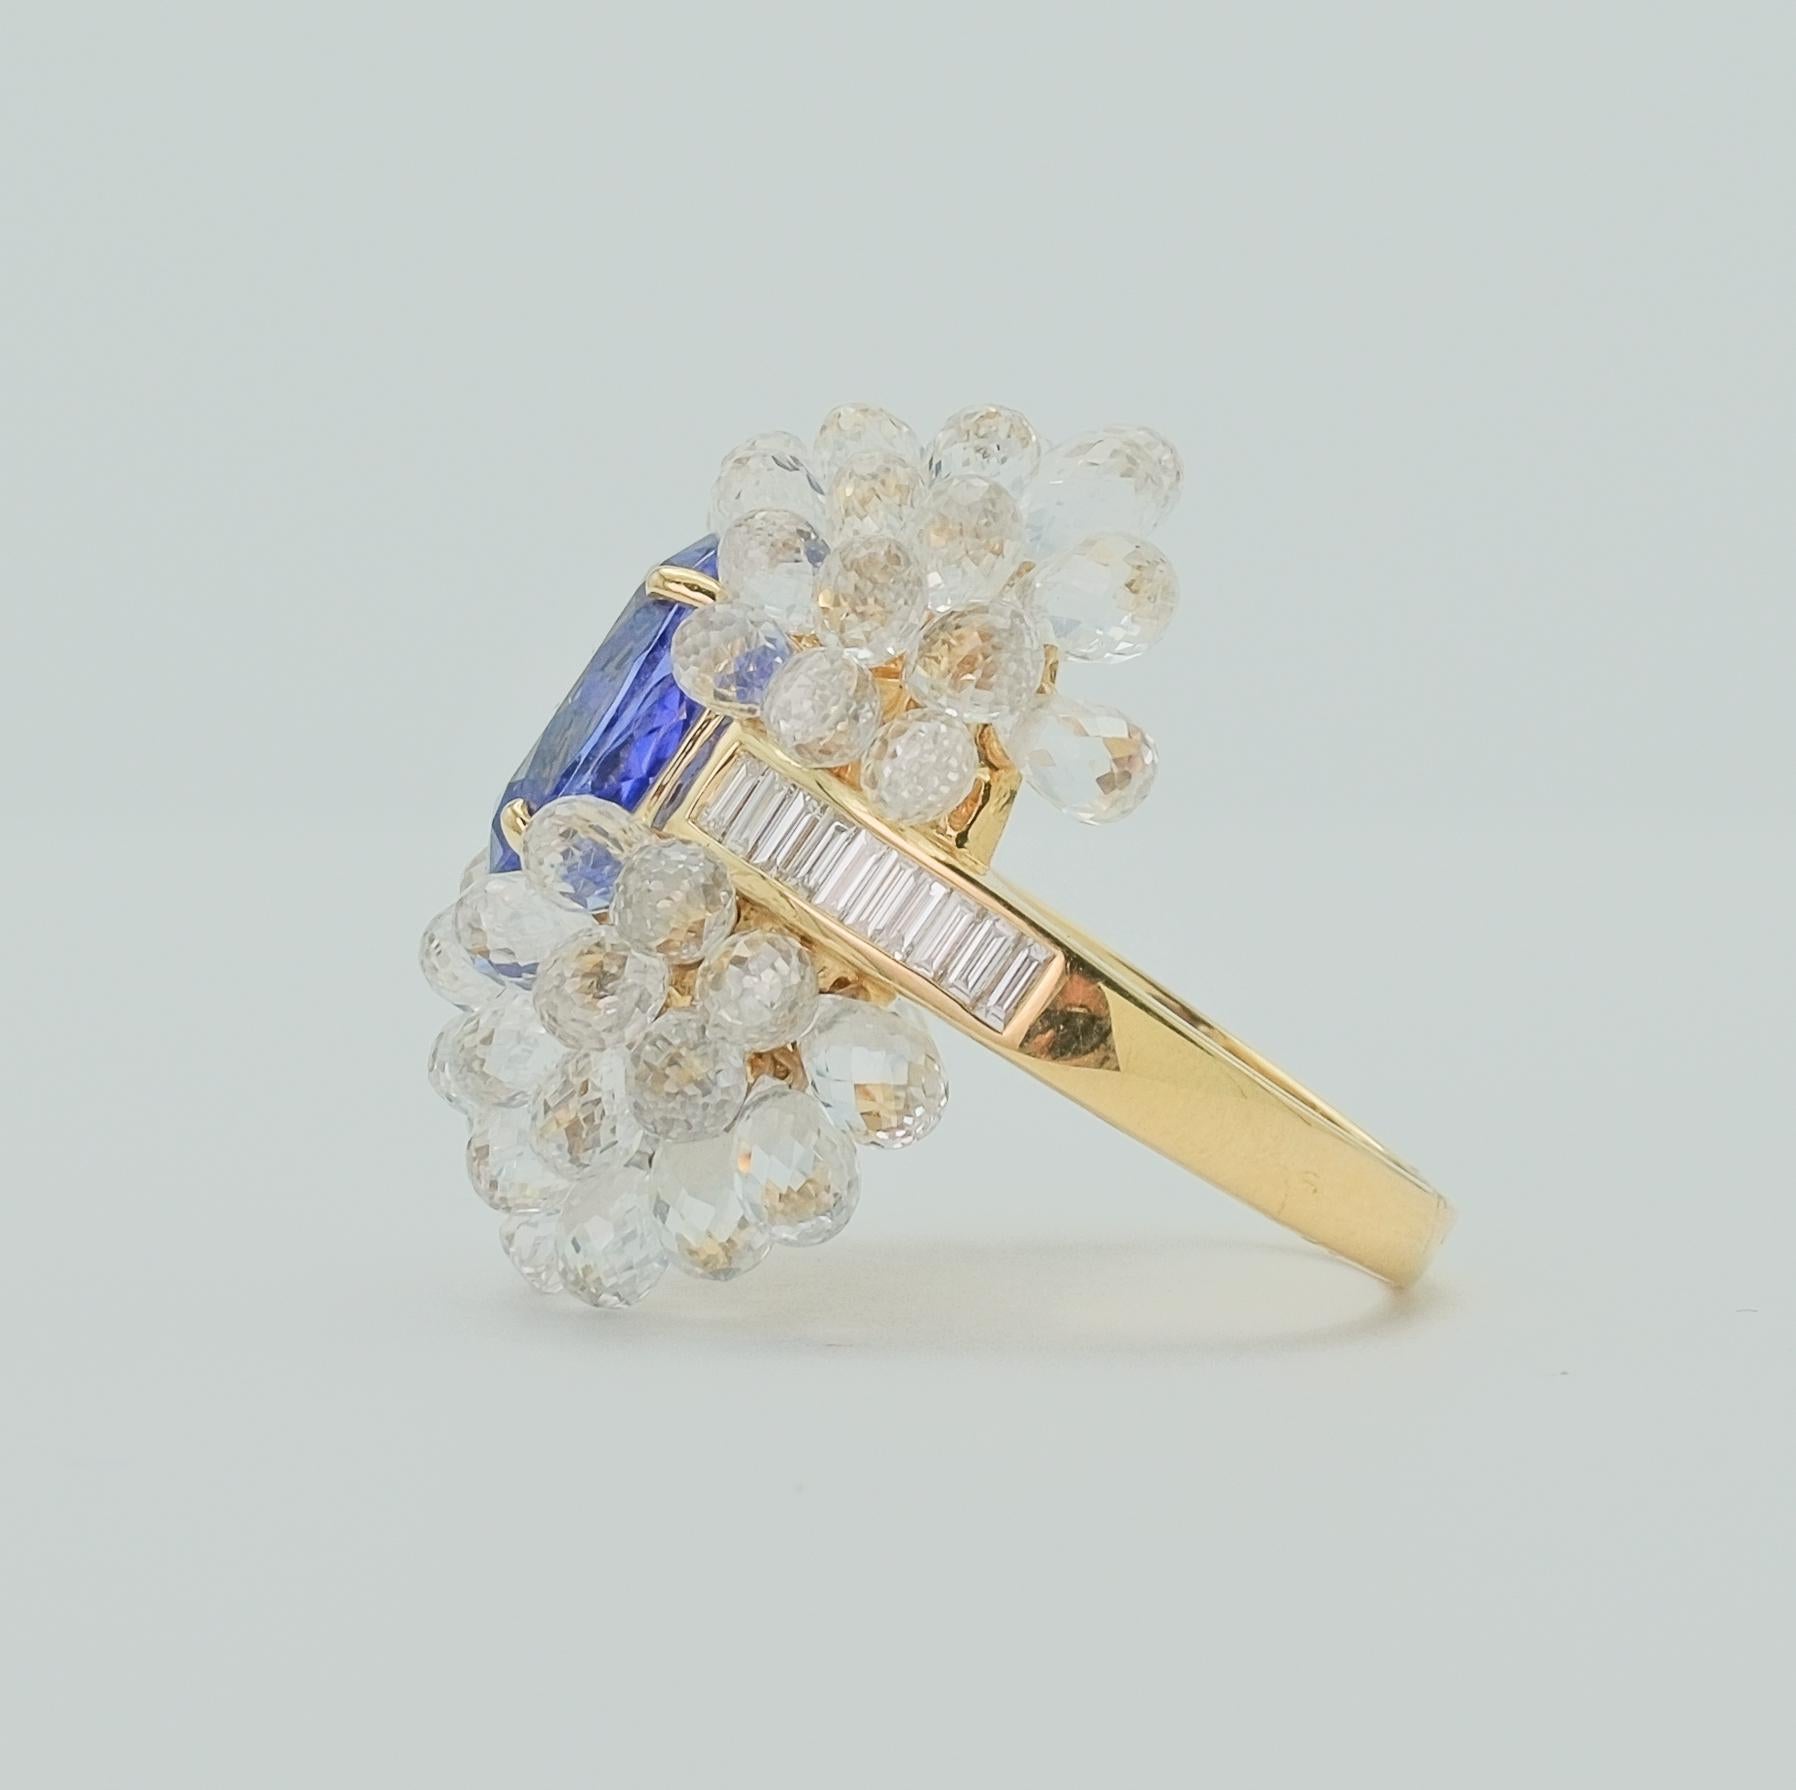 Incredibly well made ring with a tanzanite center stone surrounded by a bouquet of precisely cut white sapphires on a yellow gold band with baguette diamonds. The tanzanite is approximately 4.3 carat with 20 diamonds measuring .50 carats. The white